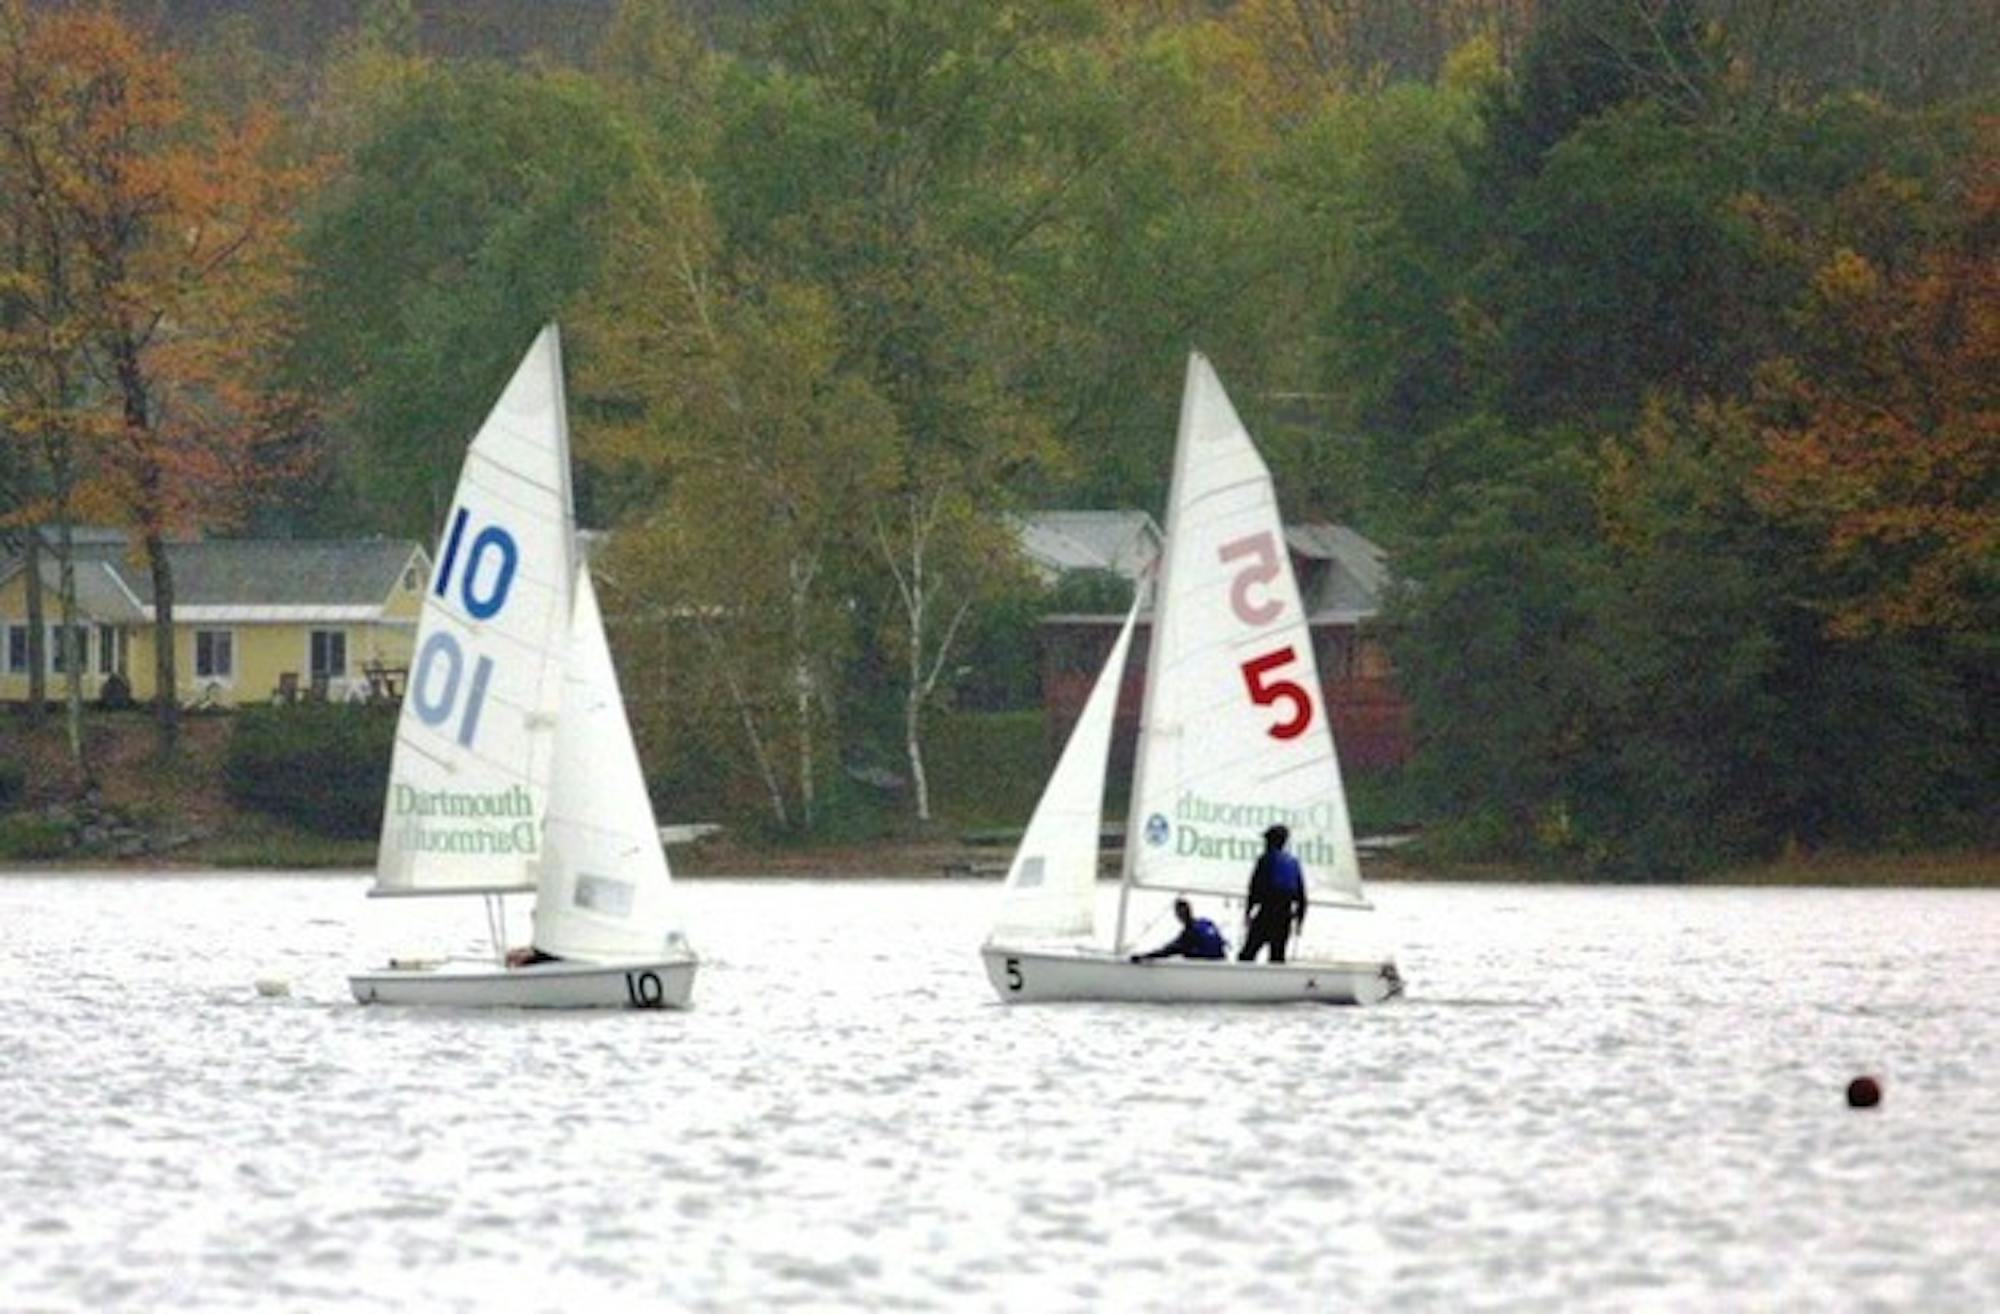 Dartmouth sailing experienced mixed results in four weekend regattas.